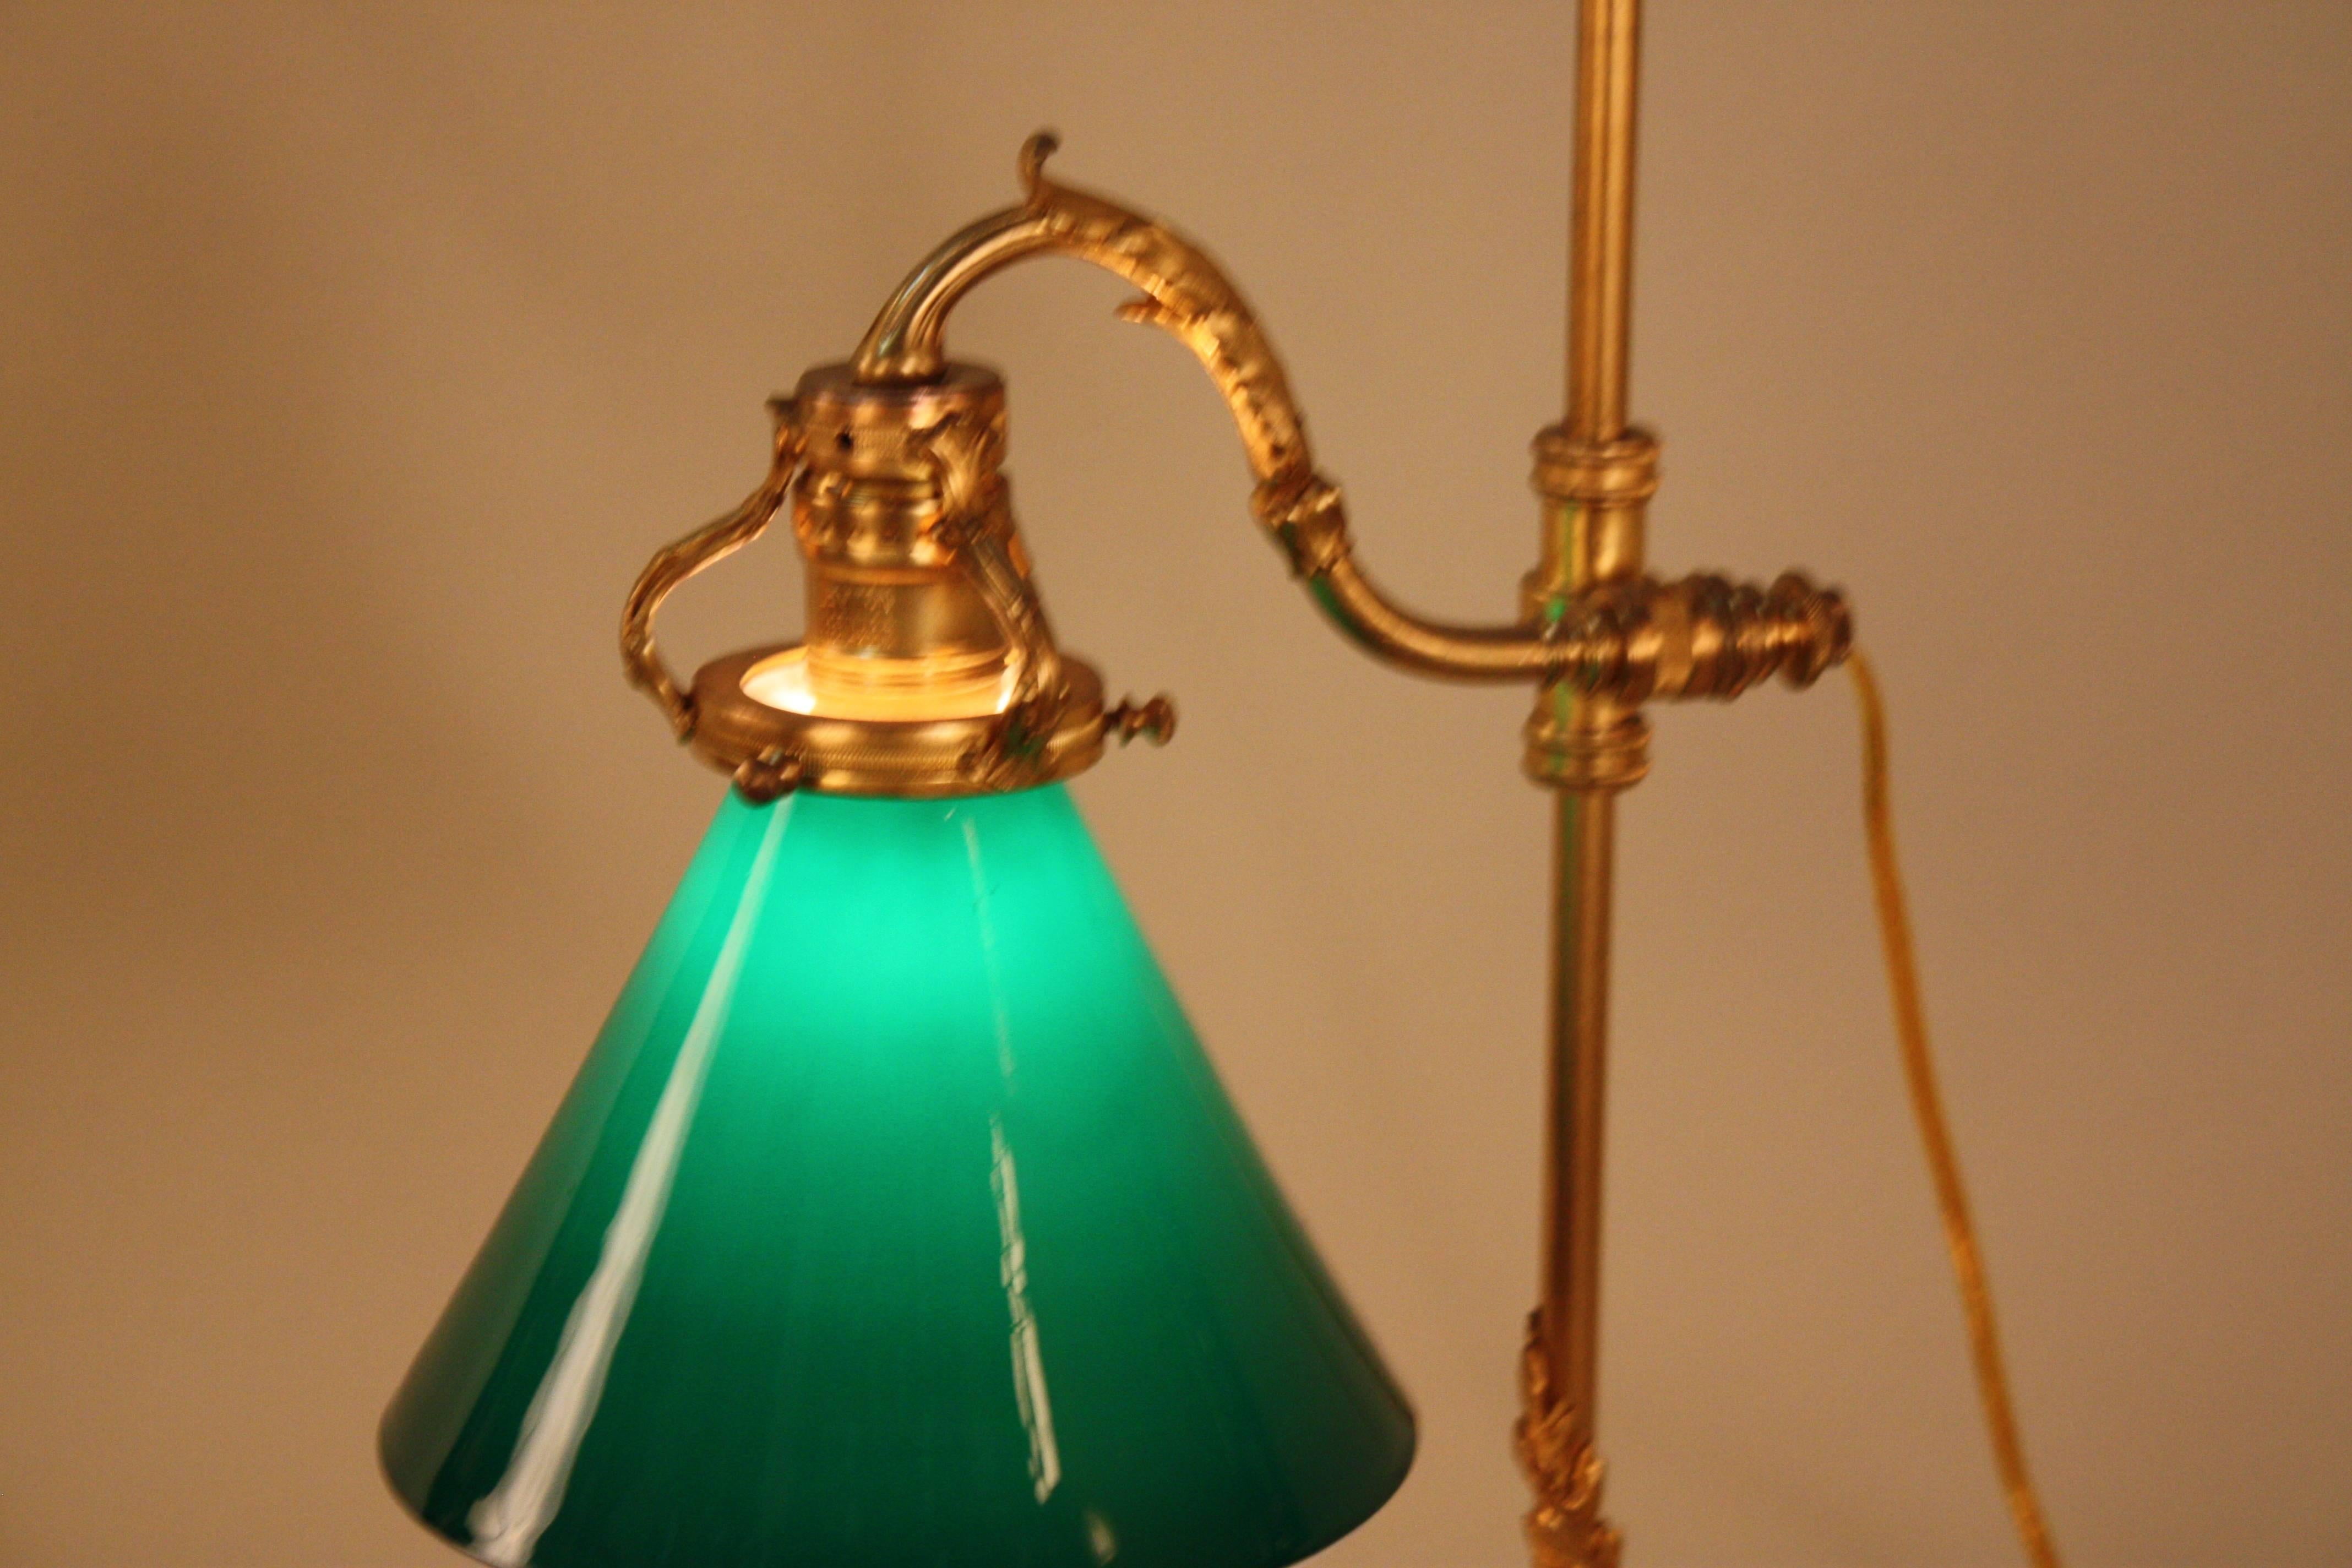 Early 20th Century French Bronze Desk Lamp with Cased Green Shade